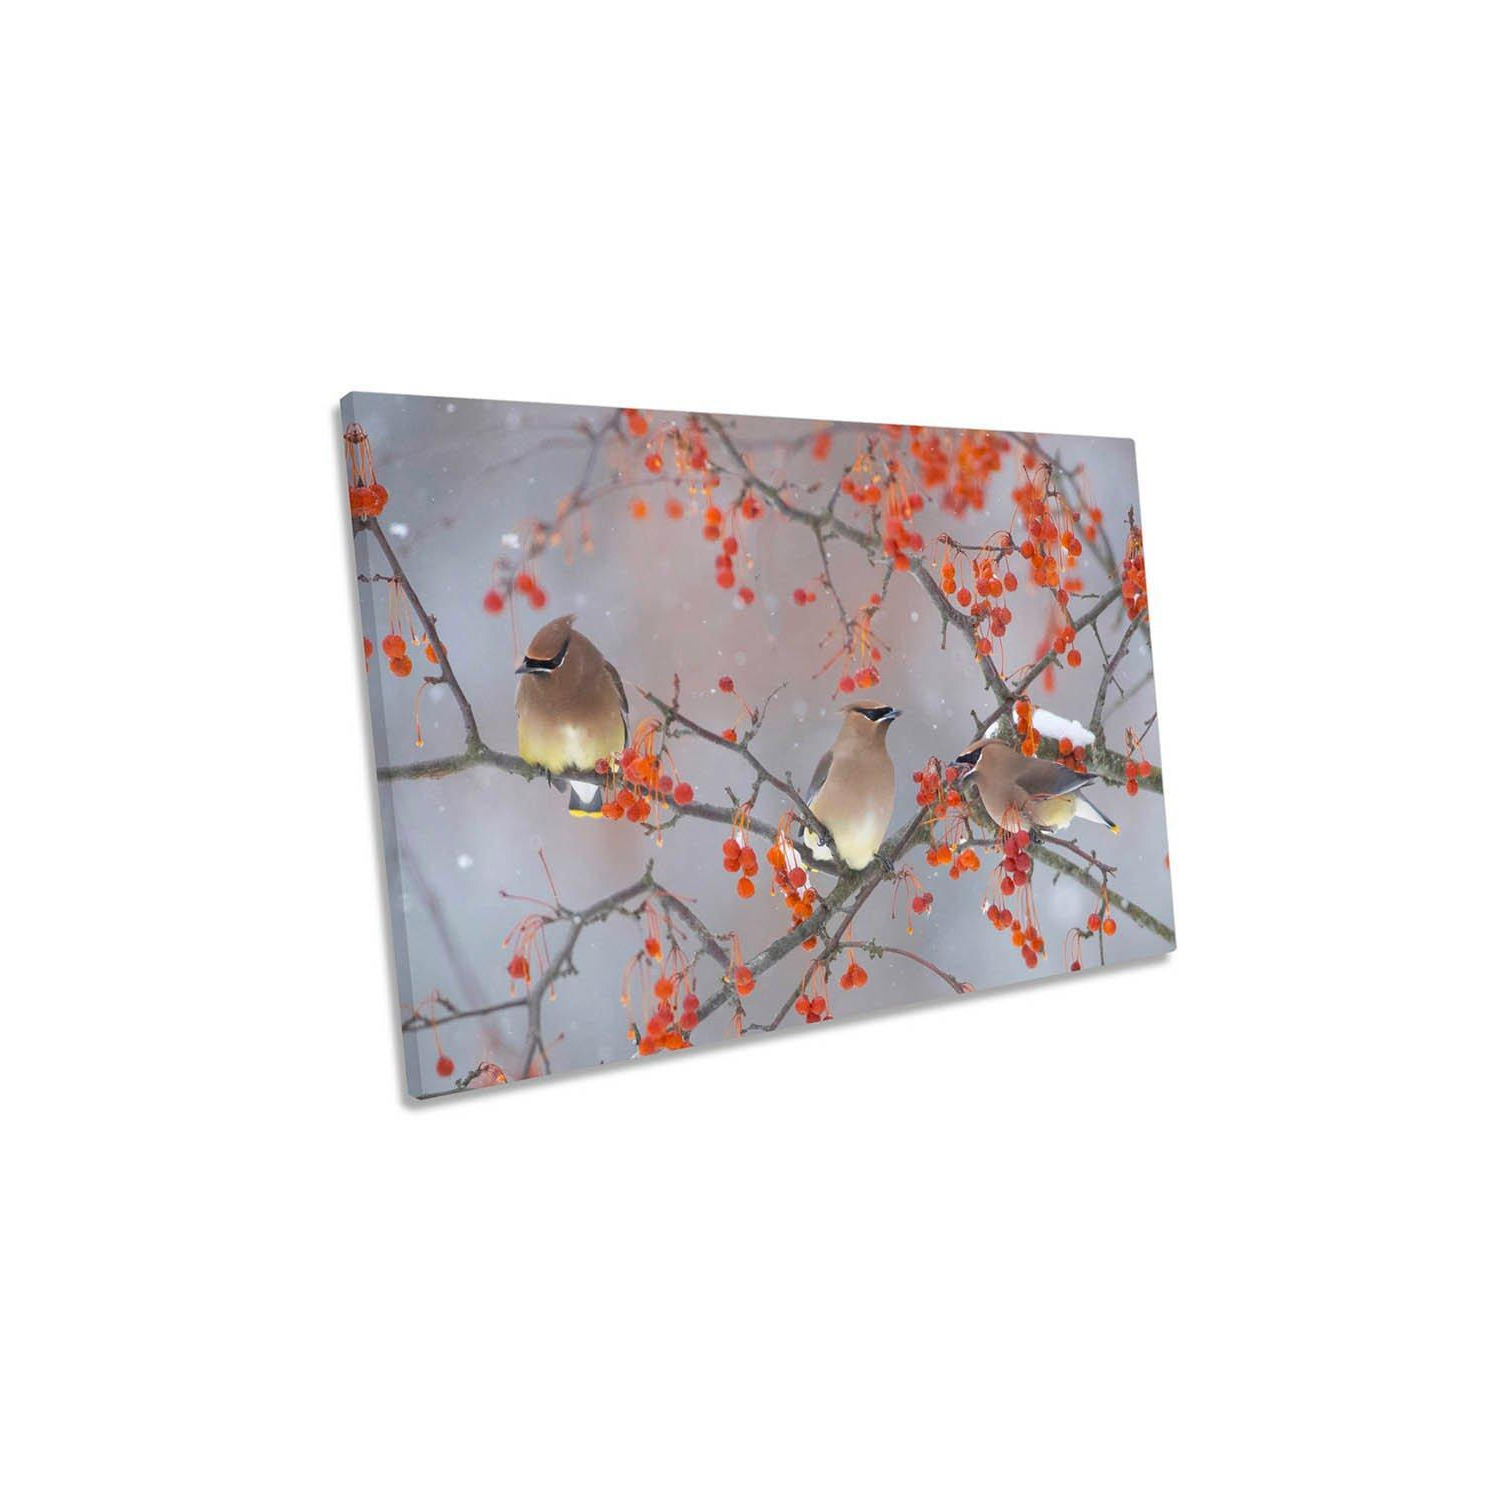 Birds in a Red Tree Branch Canvas Wall Art Picture Print - image 1